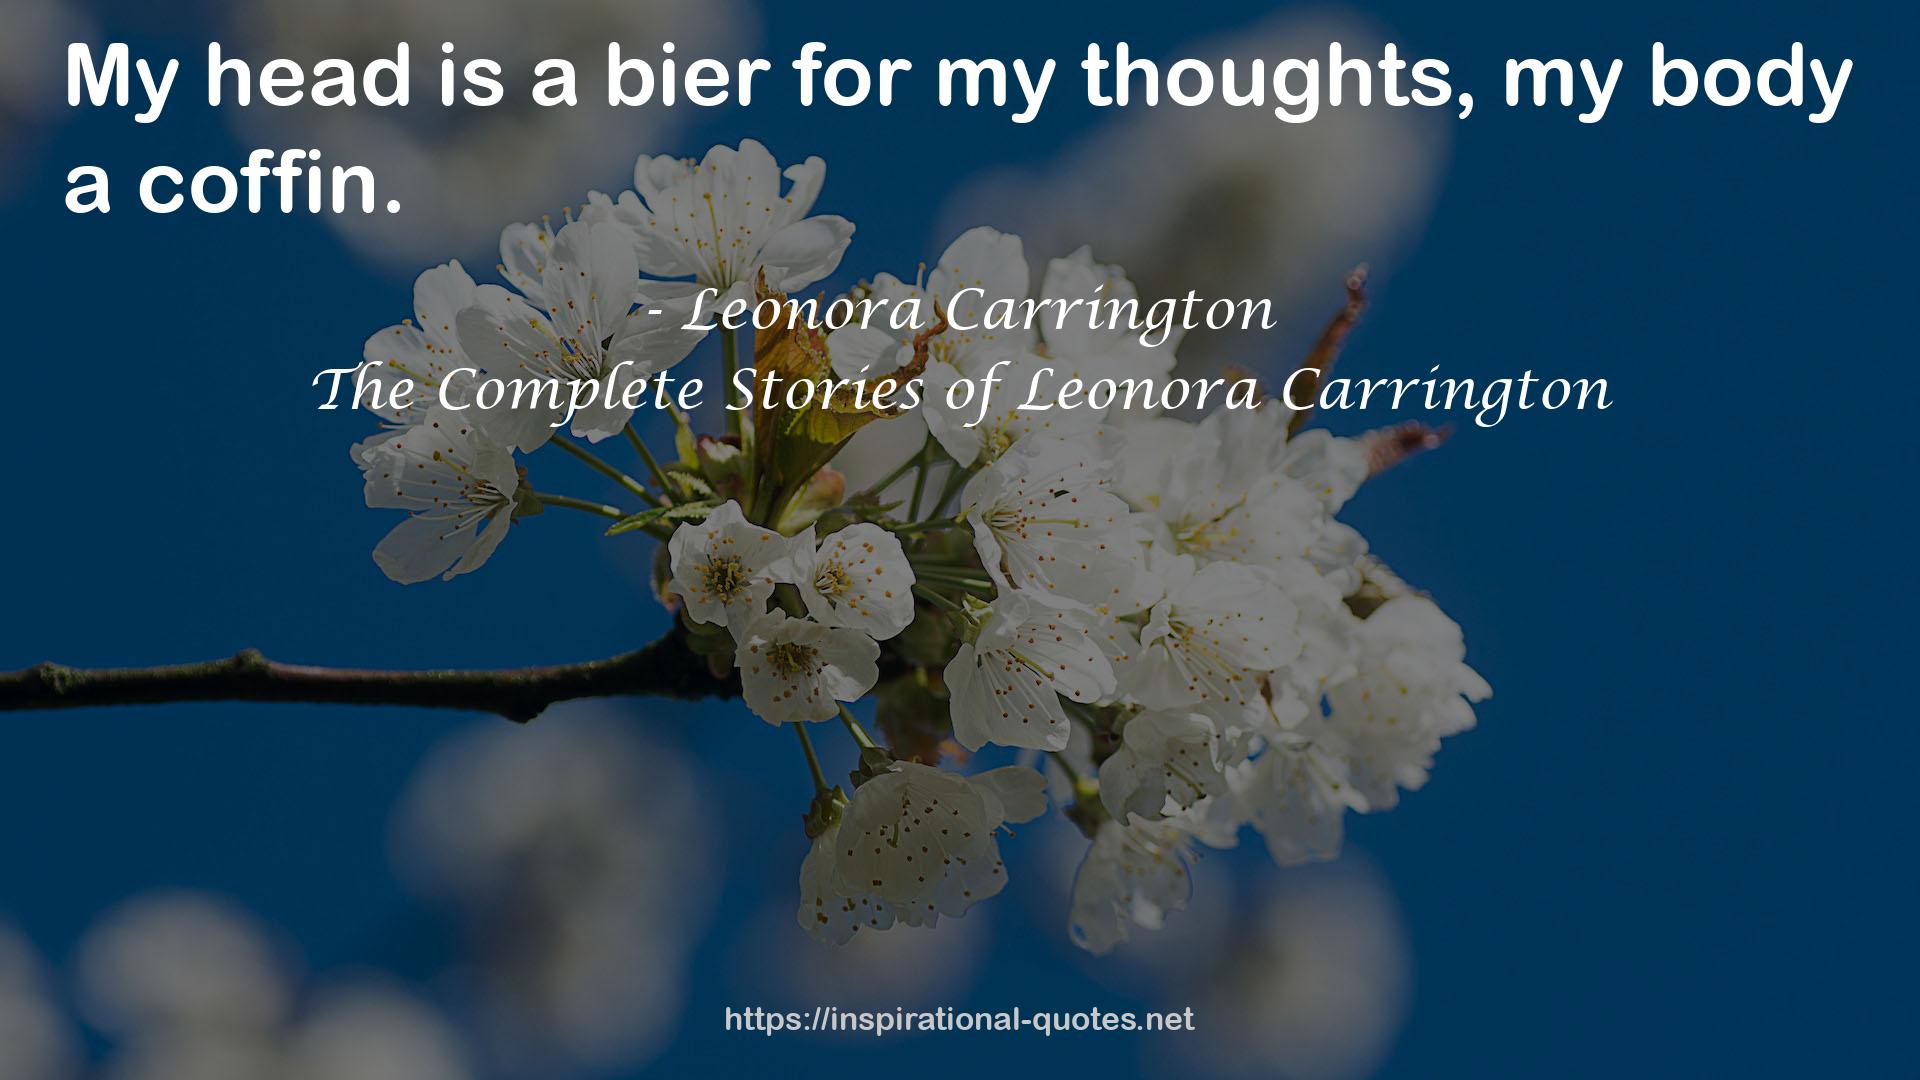 The Complete Stories of Leonora Carrington QUOTES